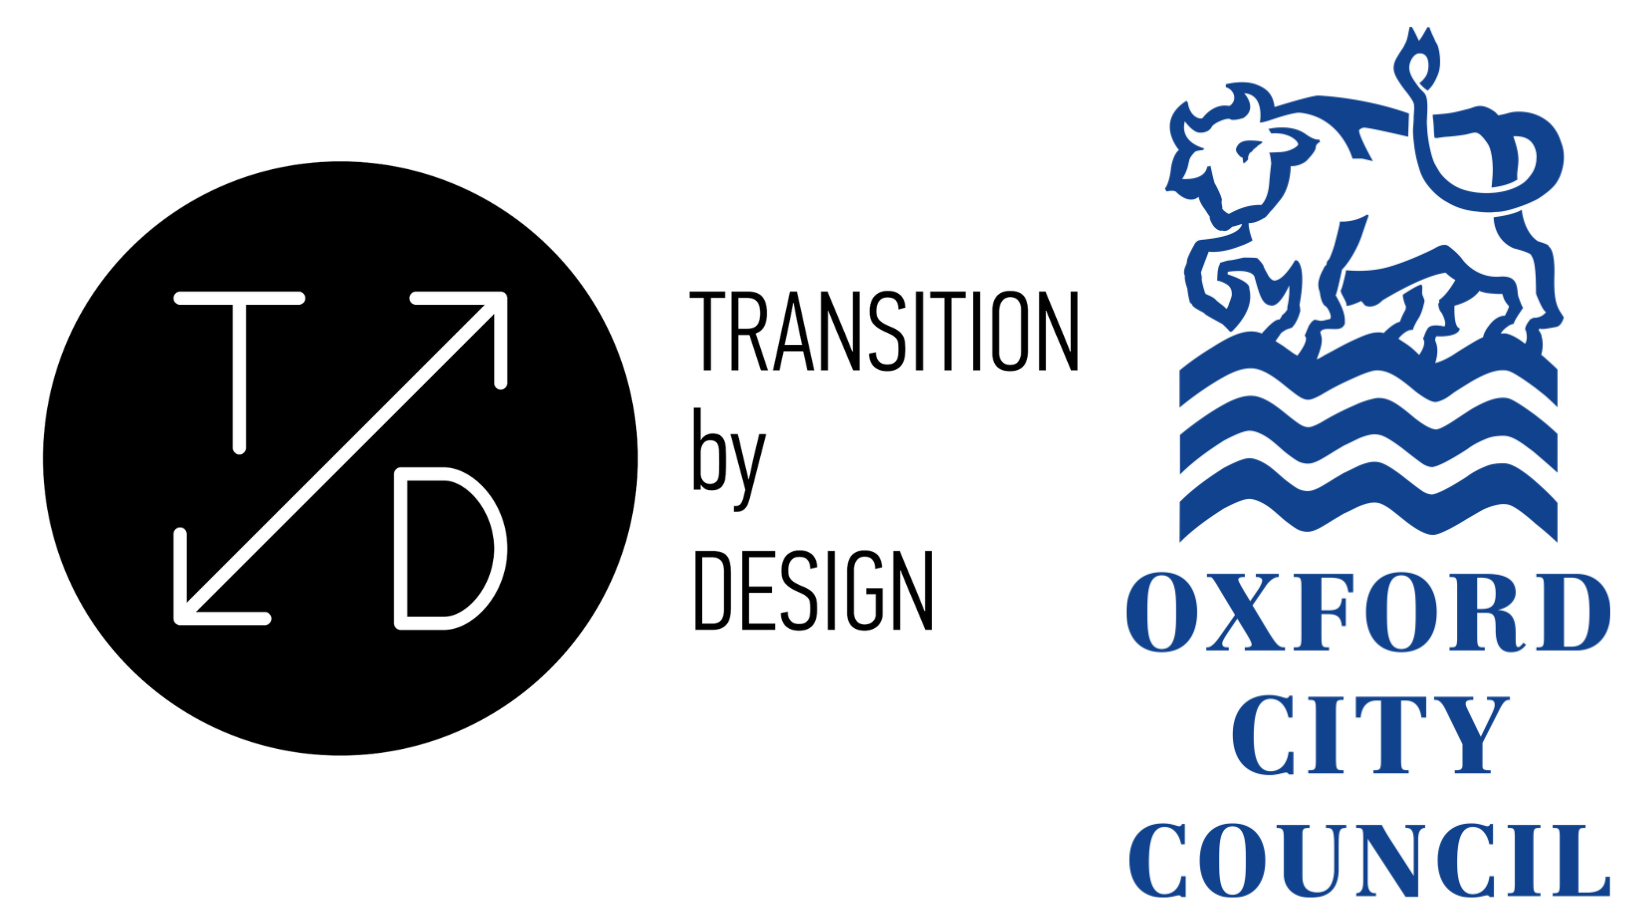 Transition by Design and Oxford City Council logos